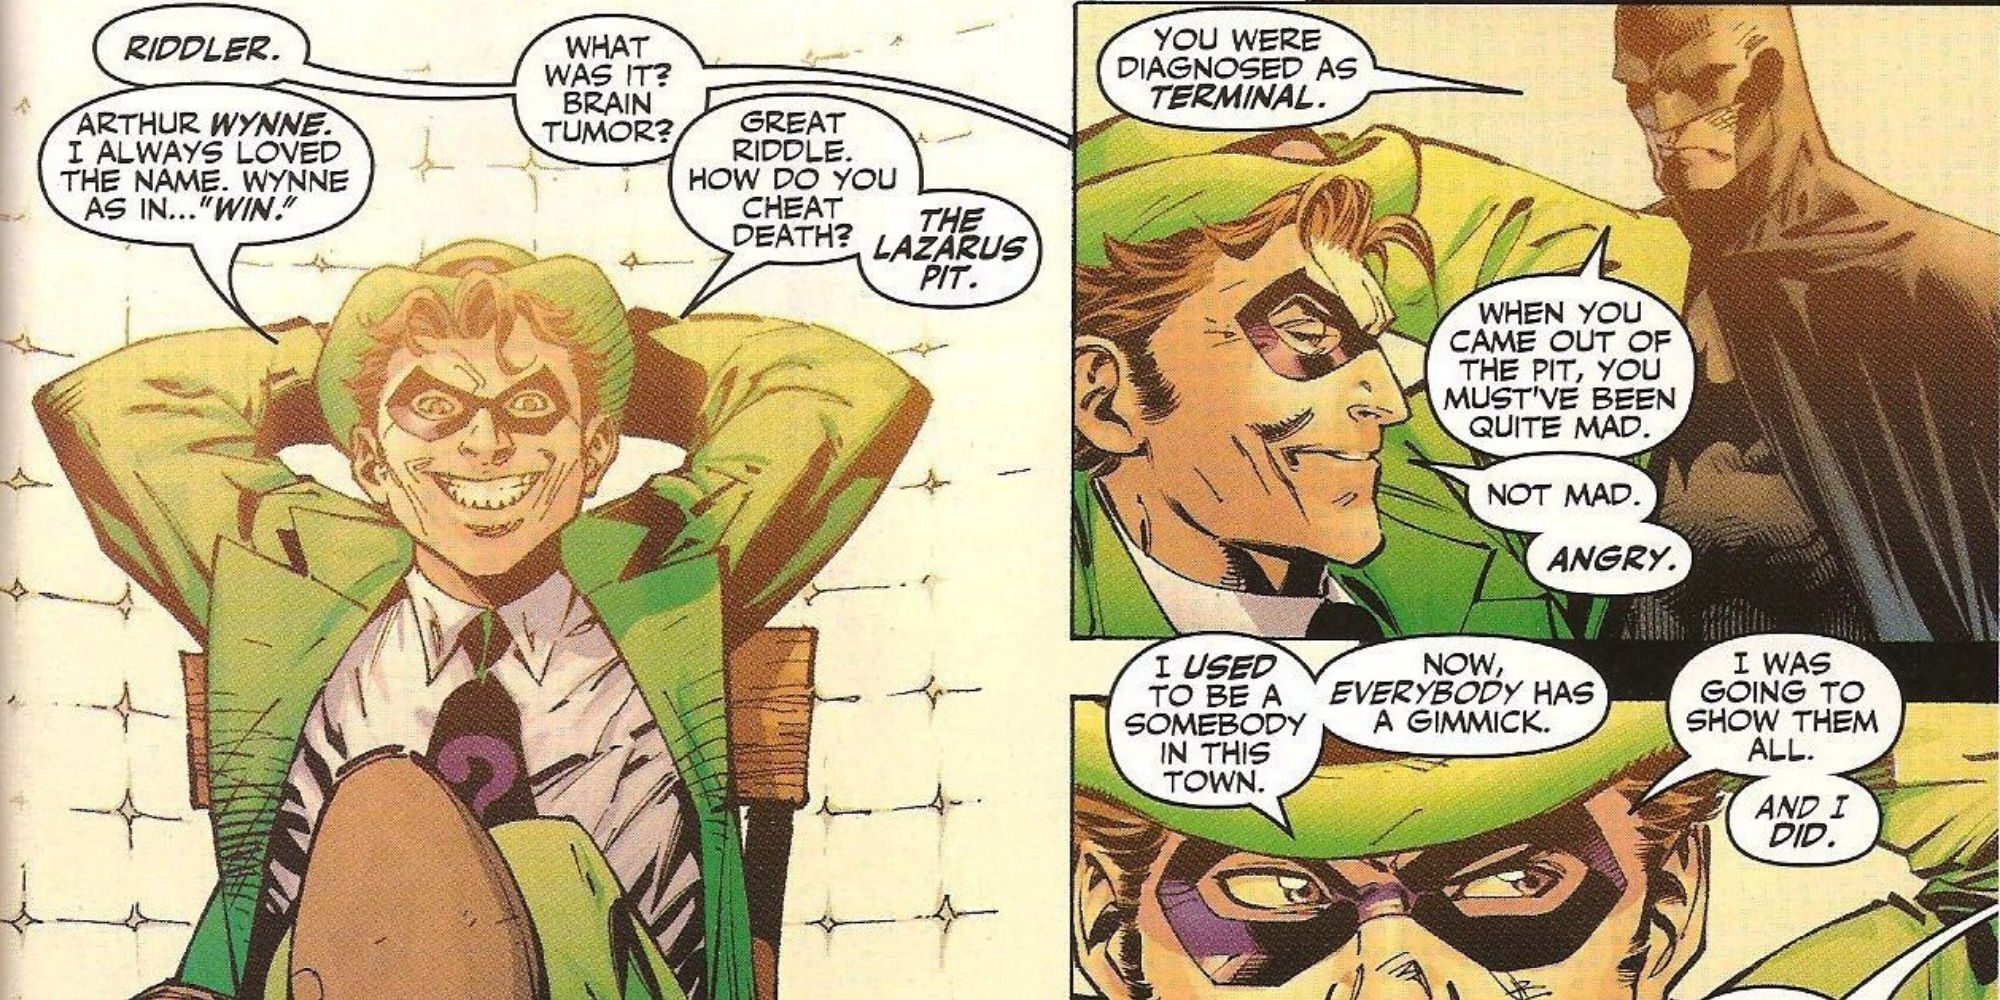 Riddler confessing to Batman he used a Lazarus Pit